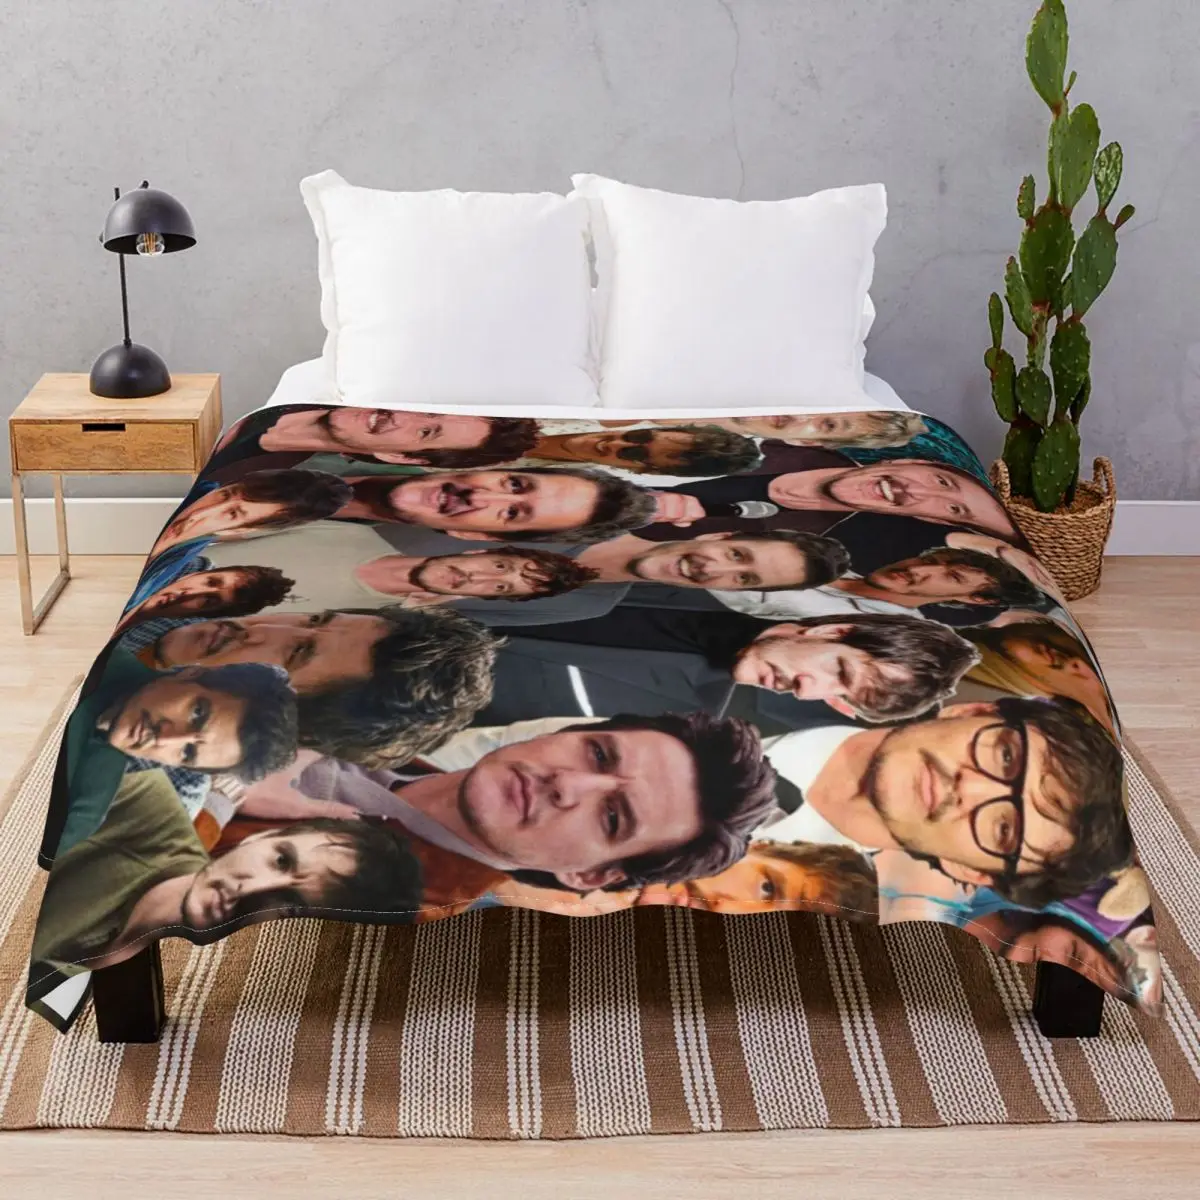 Pedro Pascal Photo Collage Blanket Flannel Textile Decor Comfortable Throw Blankets for Bed Home Couch Travel Office